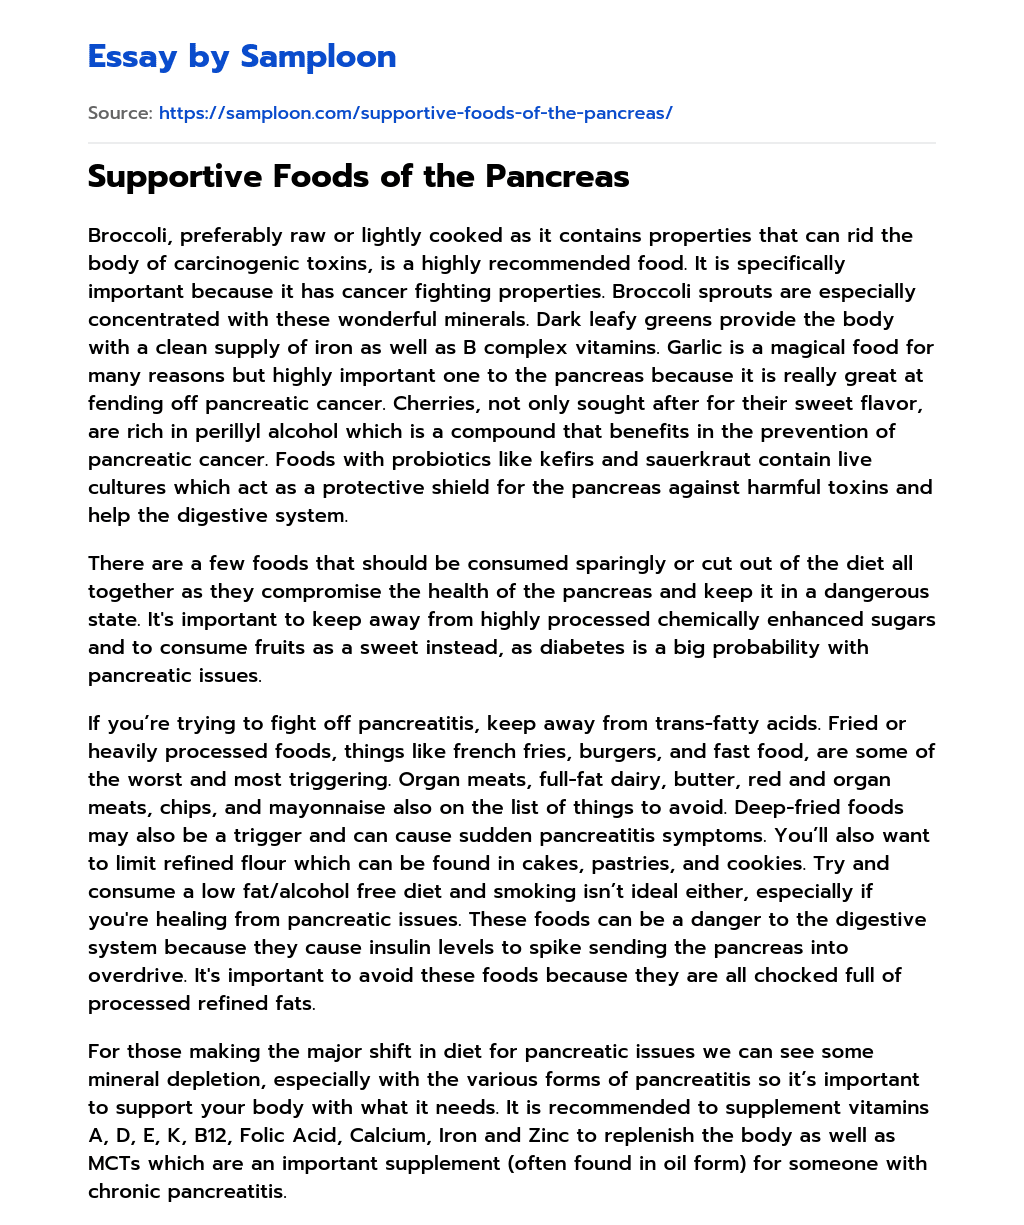 Supportive Foods of the Pancreas essay